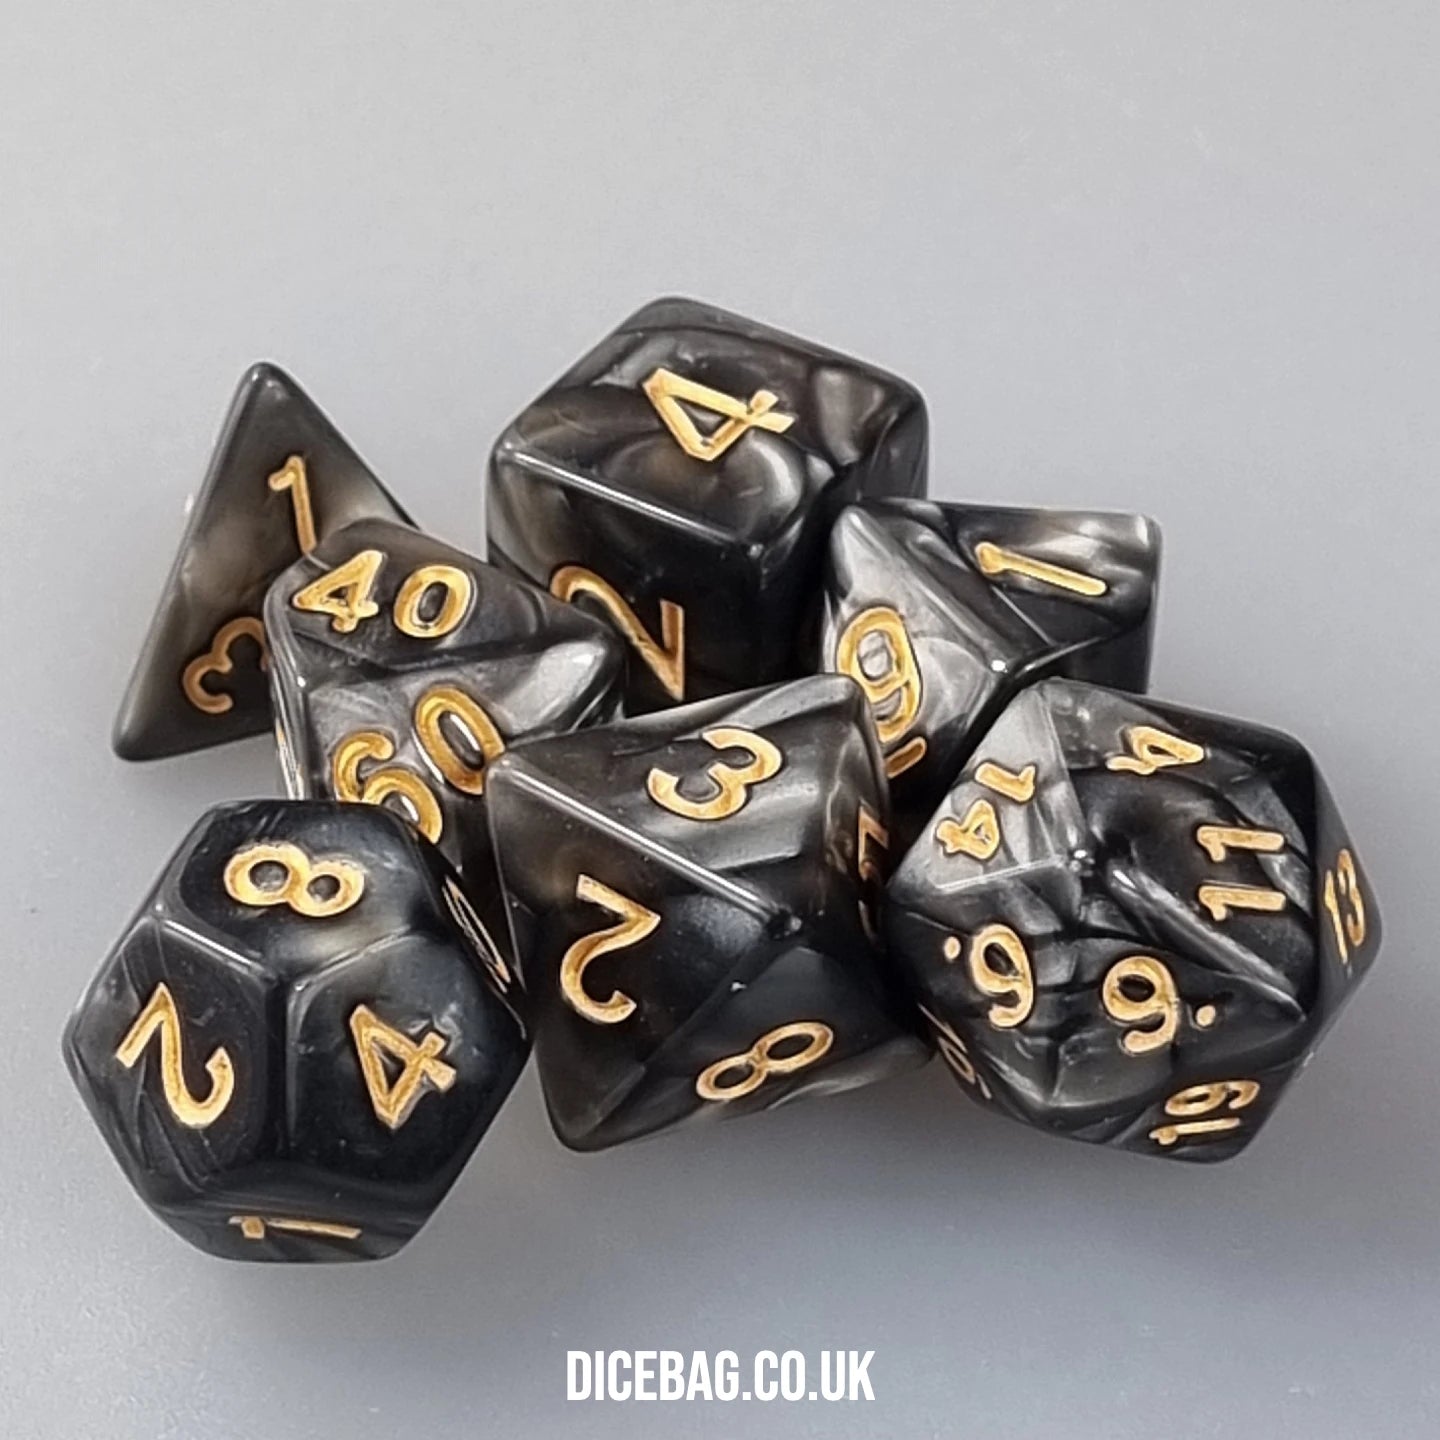 Hades' Path Marbled Acrylic Polyhedral Dungeons & Dragons Dice Set - Black